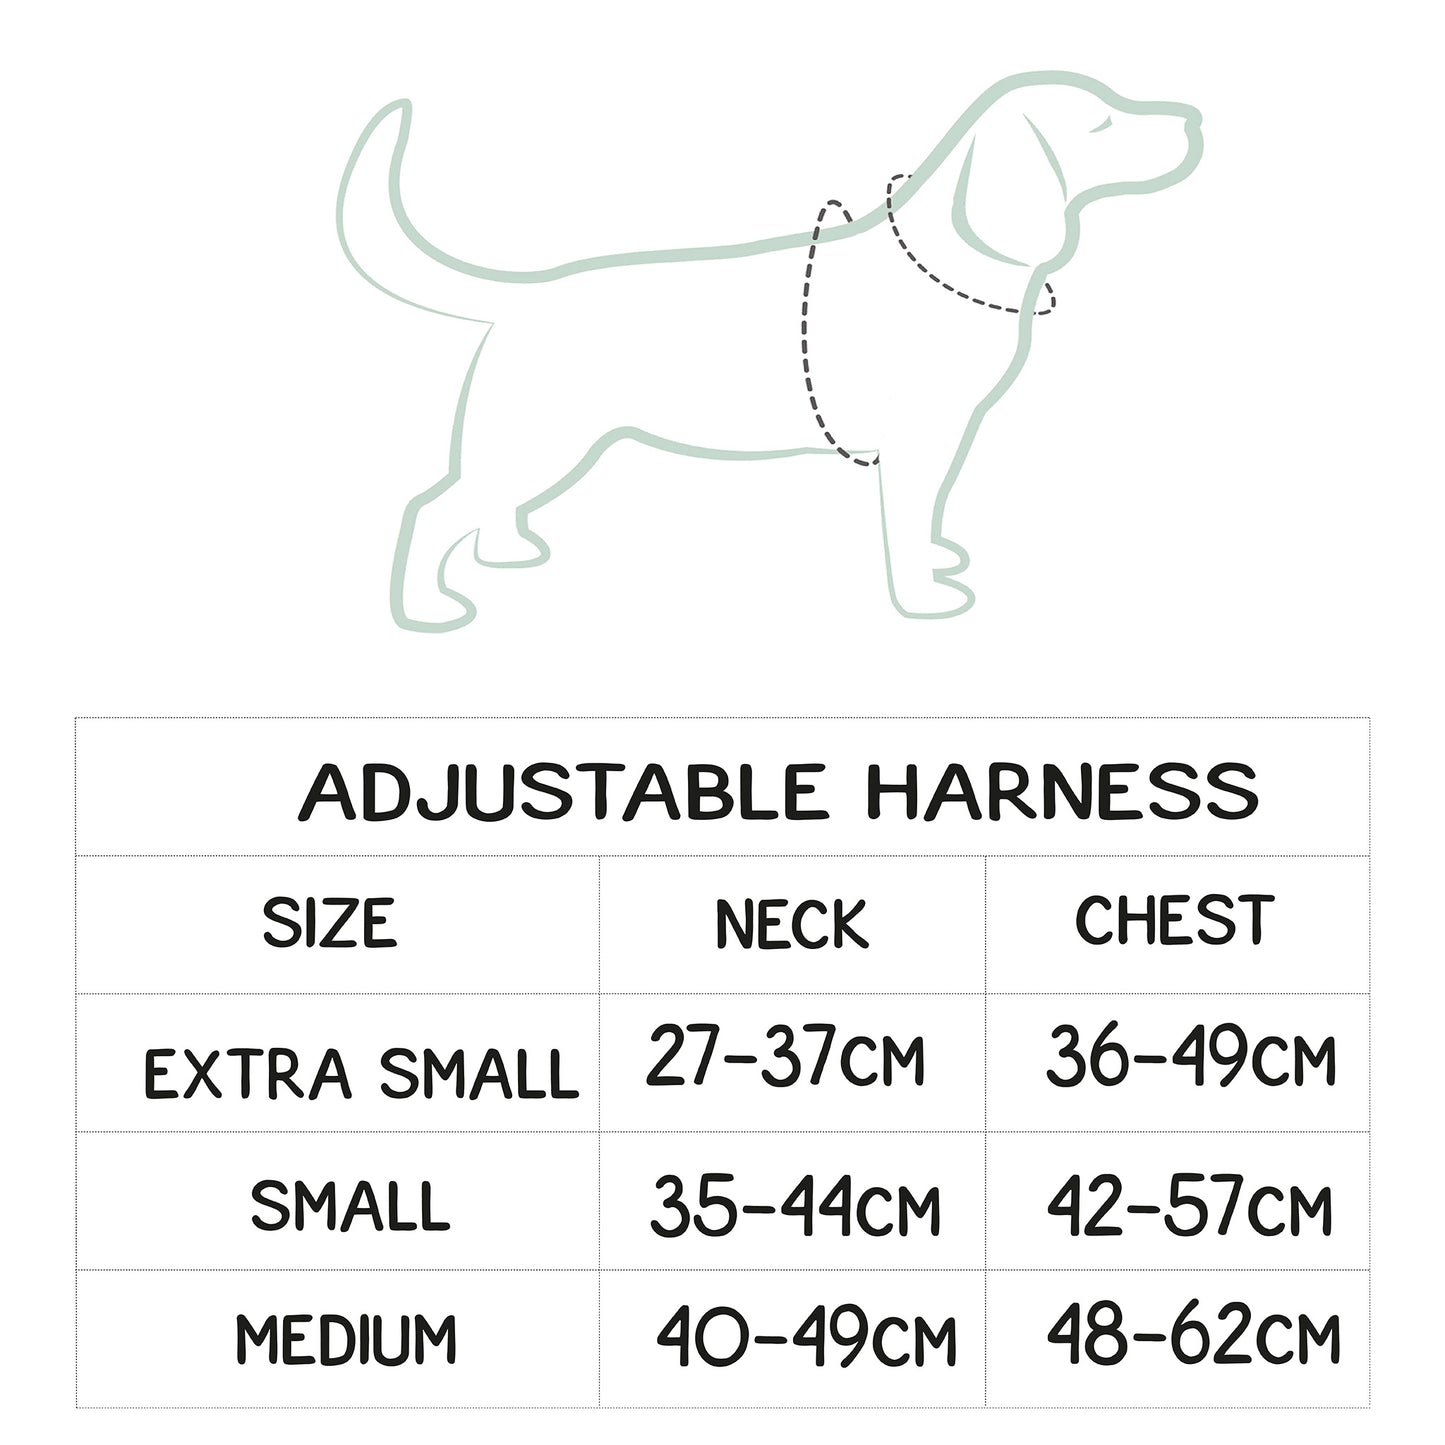 Dog harness size guide